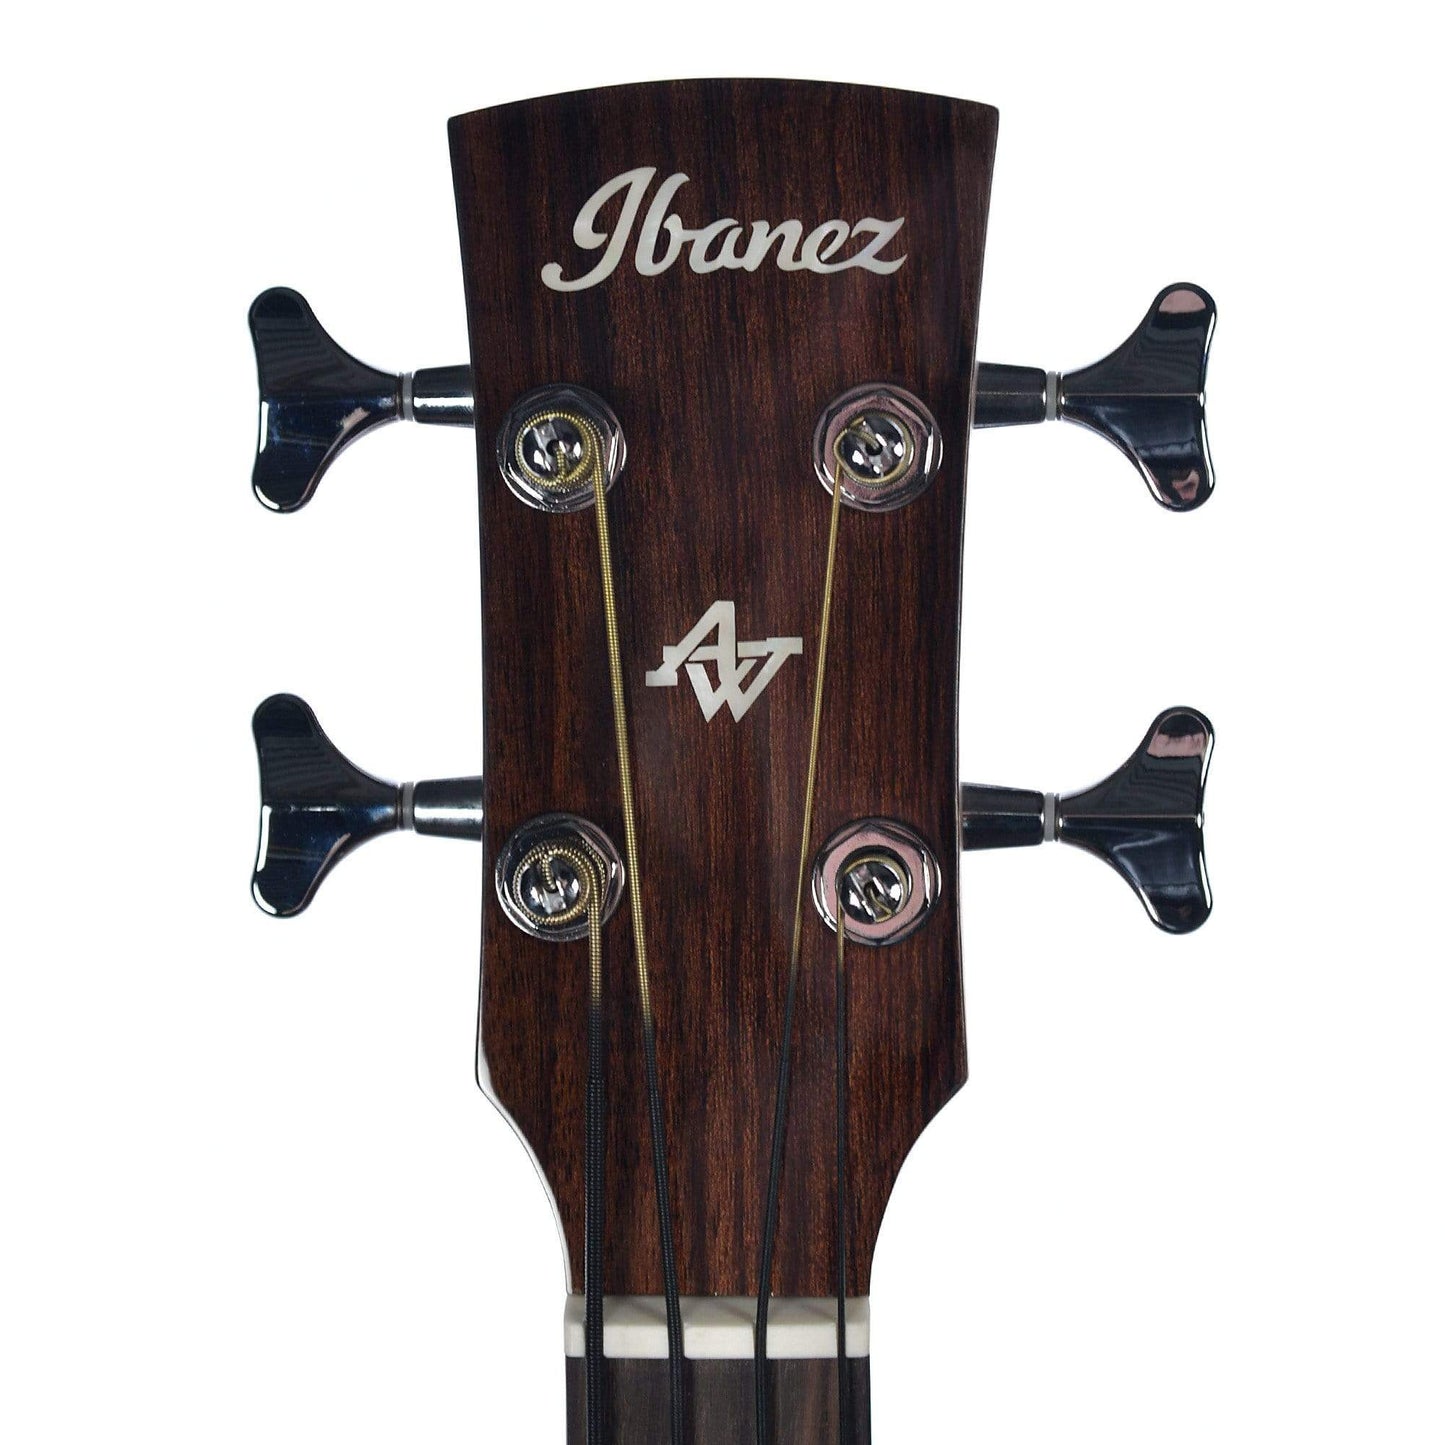 Ibanez AVCB9CE Artwood Acoustic Bass Bass Guitars / 4-String